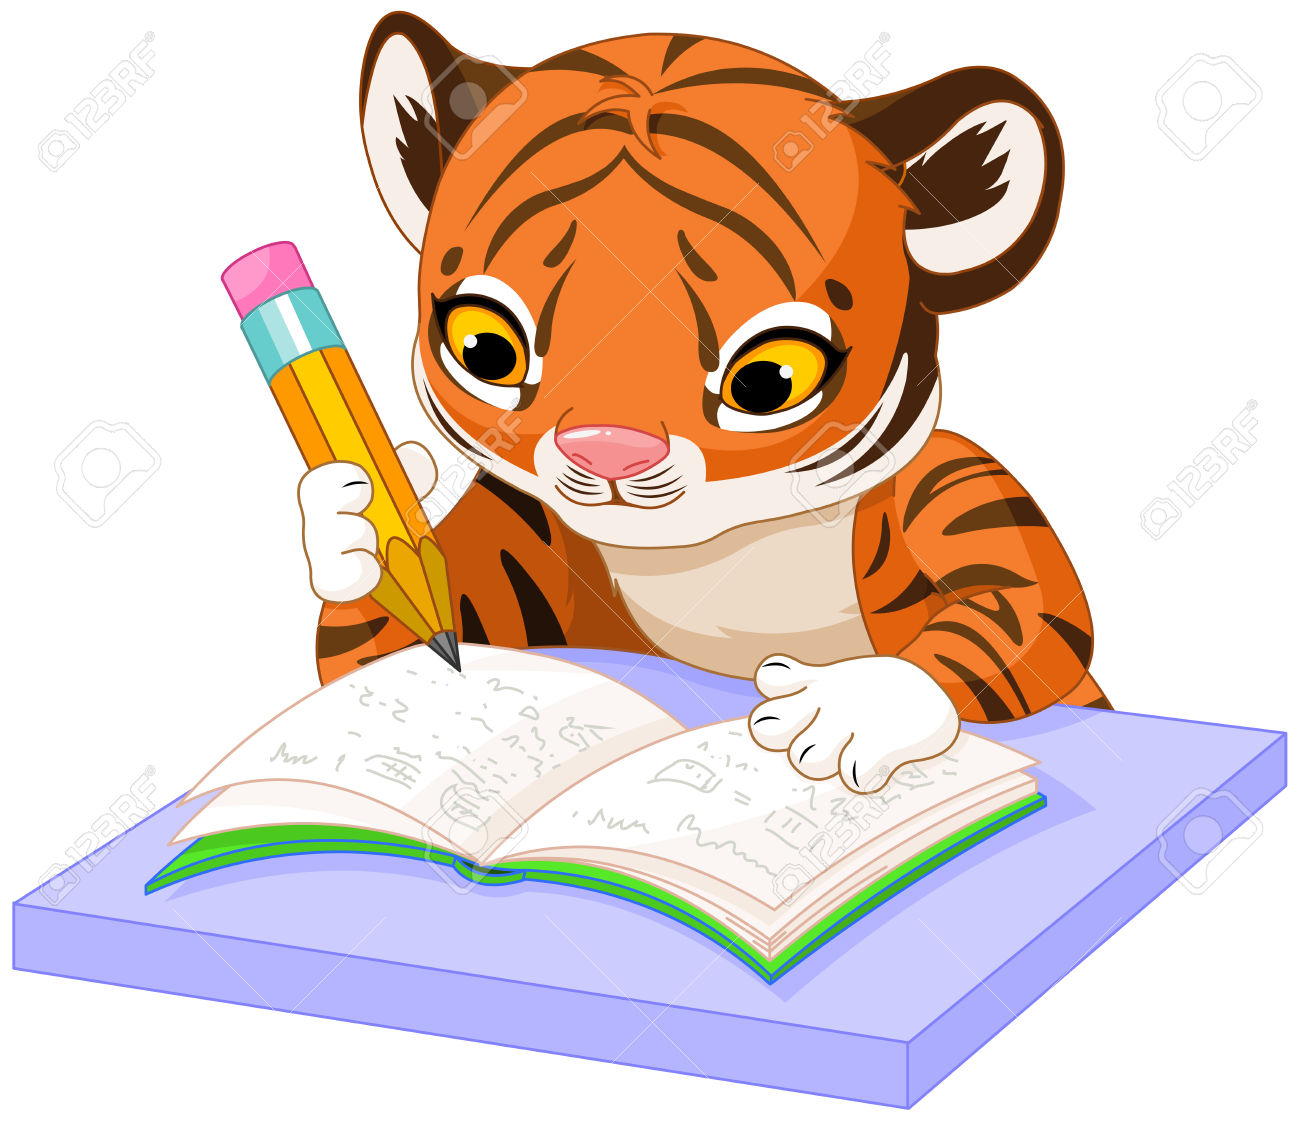 7,489 Cute Tiger Stock Vector Illustration And Royalty Free Cute.